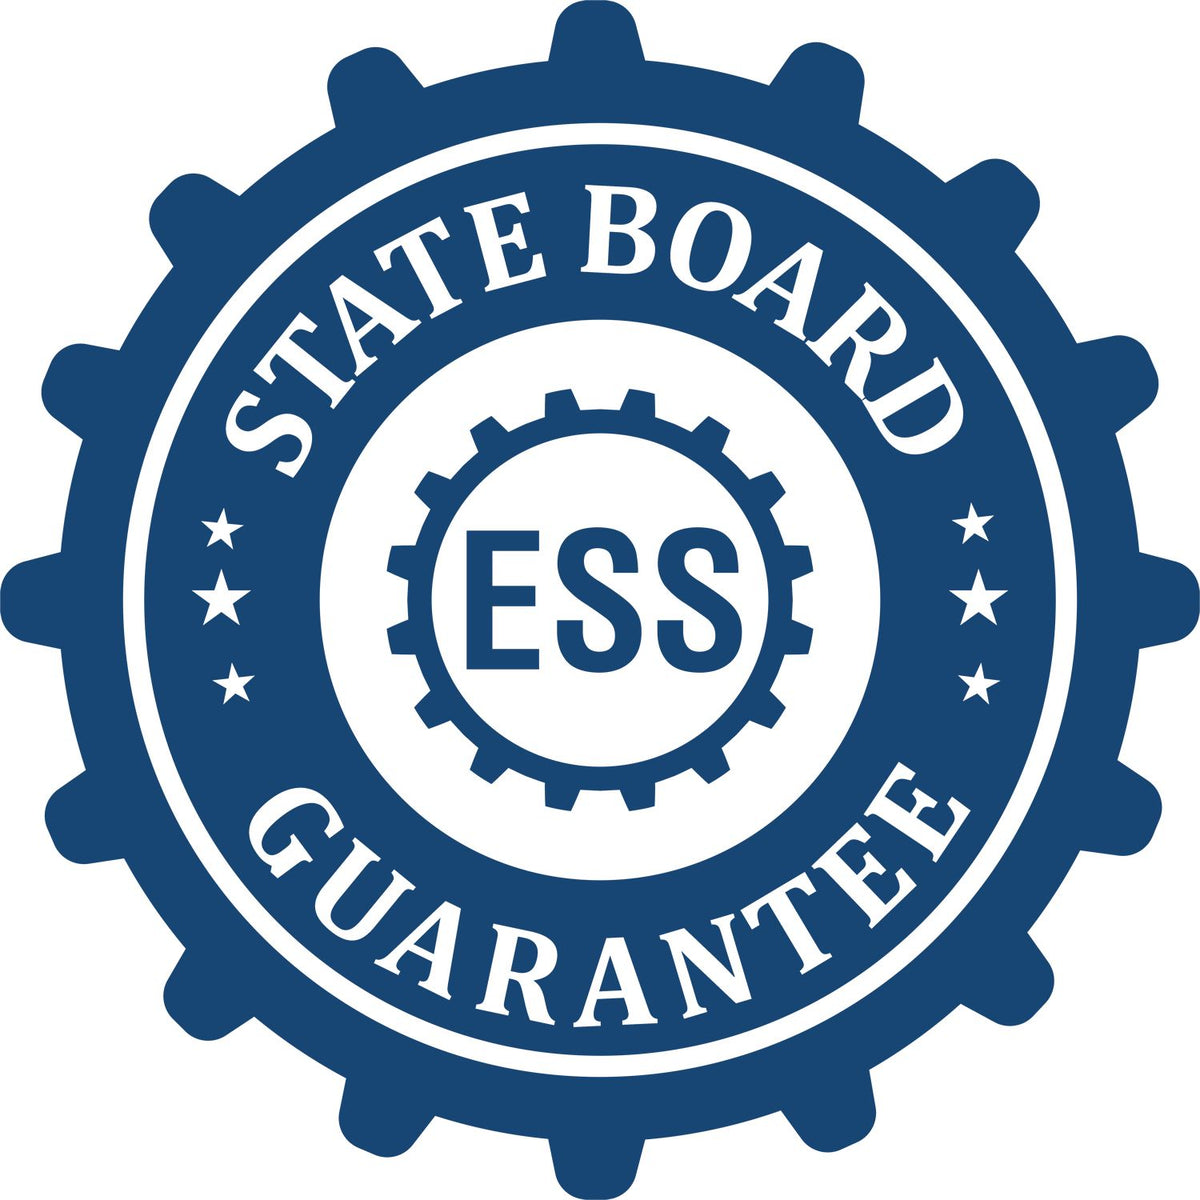 An emblem in a gear shape illustrating a state board guarantee for the Alabama Professional Engineer Seal Stamp product.